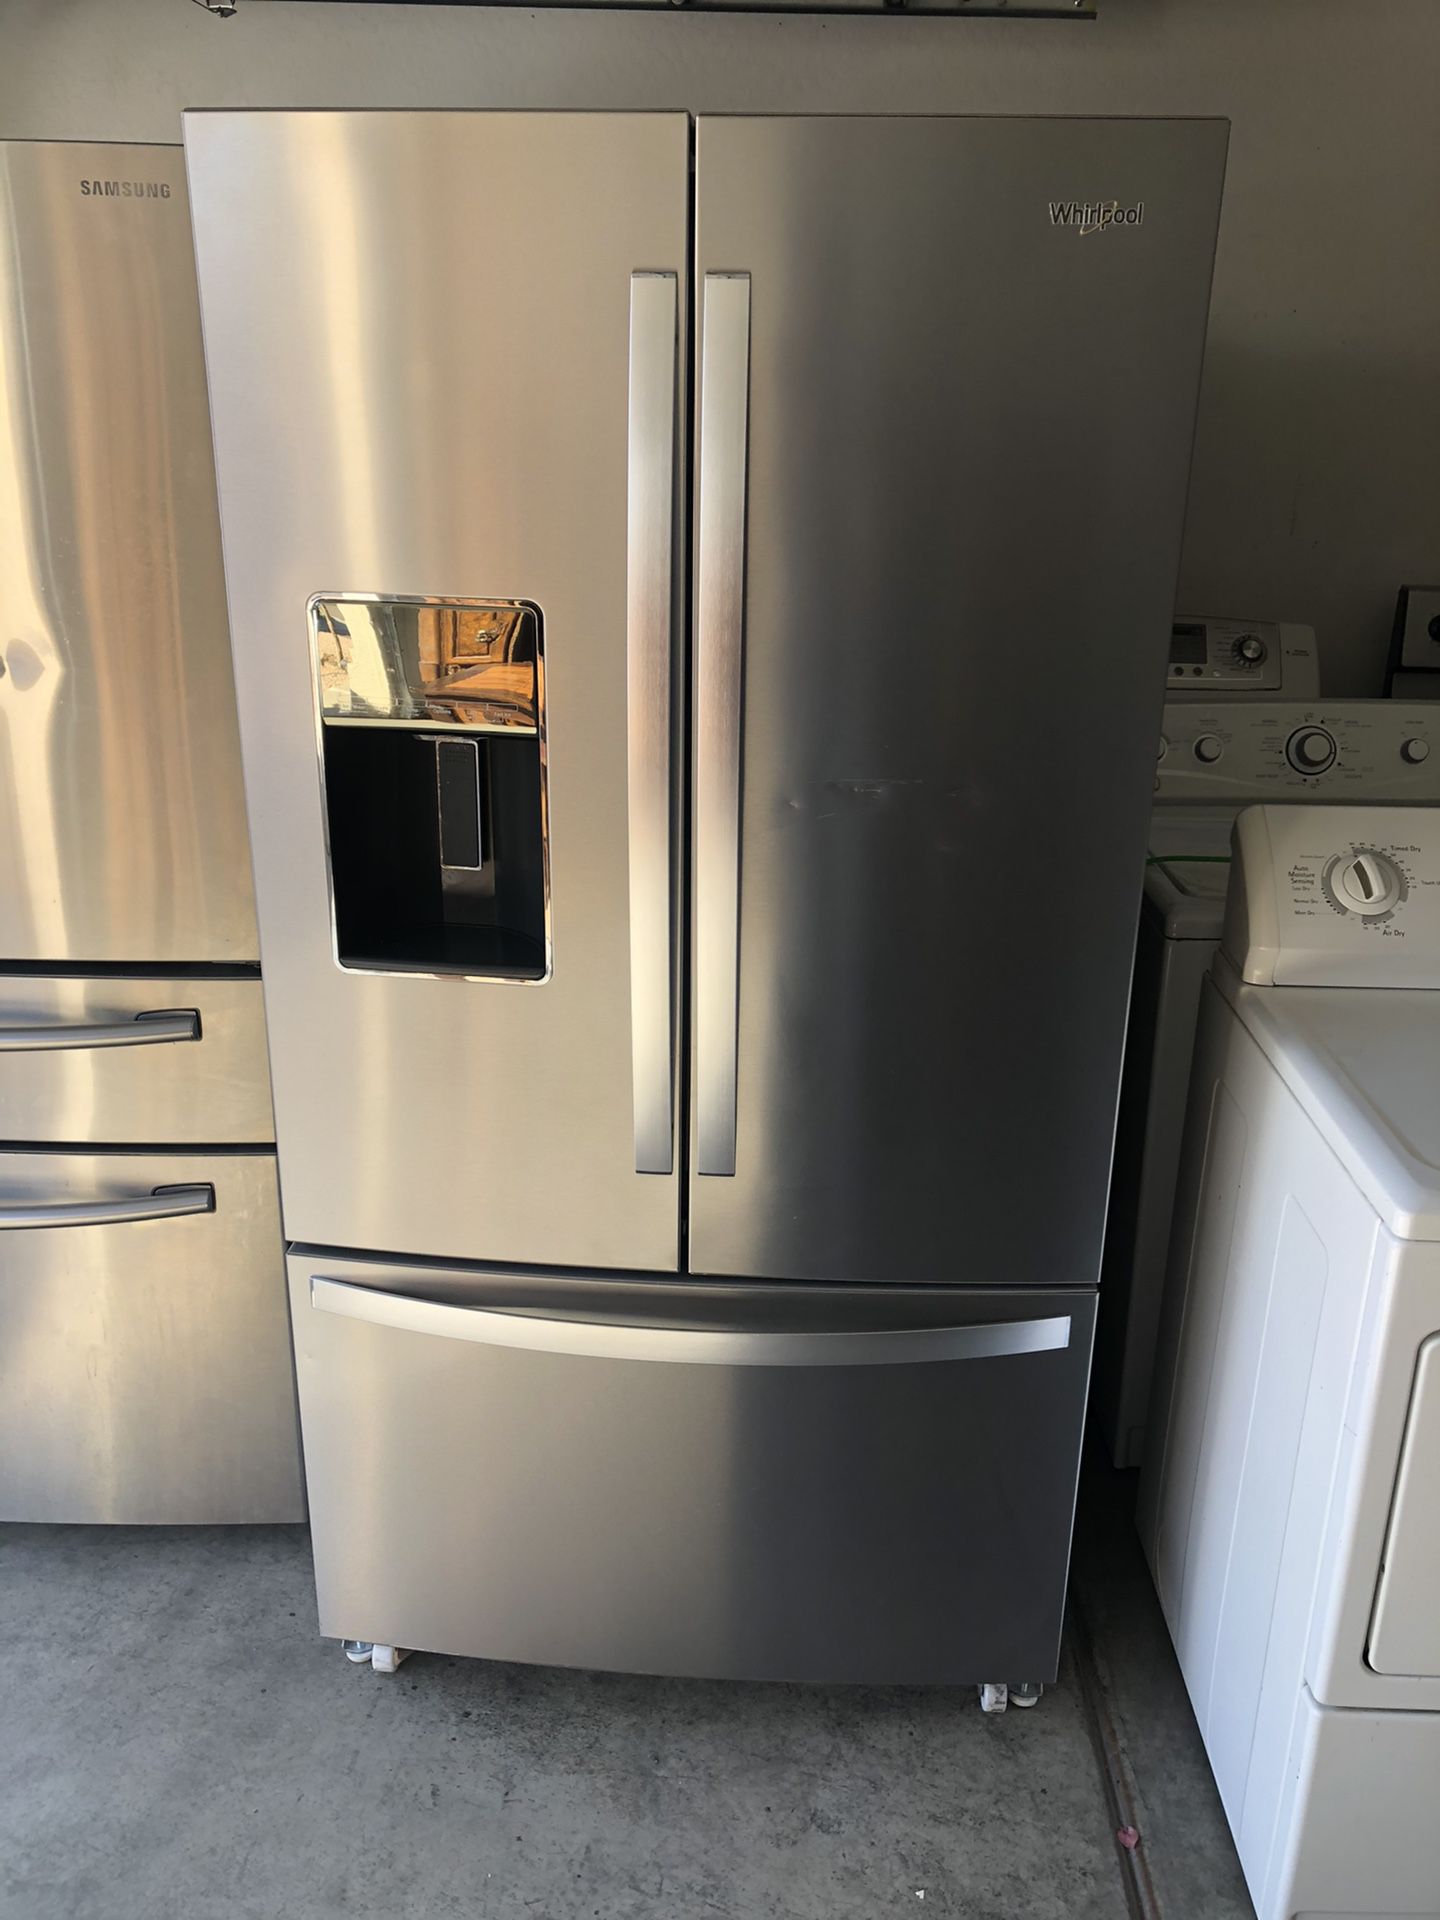 WHIRILPOOL STAINLESS STEEL REFRIGERATOR $450 OBO *** EVERYTHING WORKS GREAT, DELIVERY AVAILABLE,90 DAY WARRANTY 